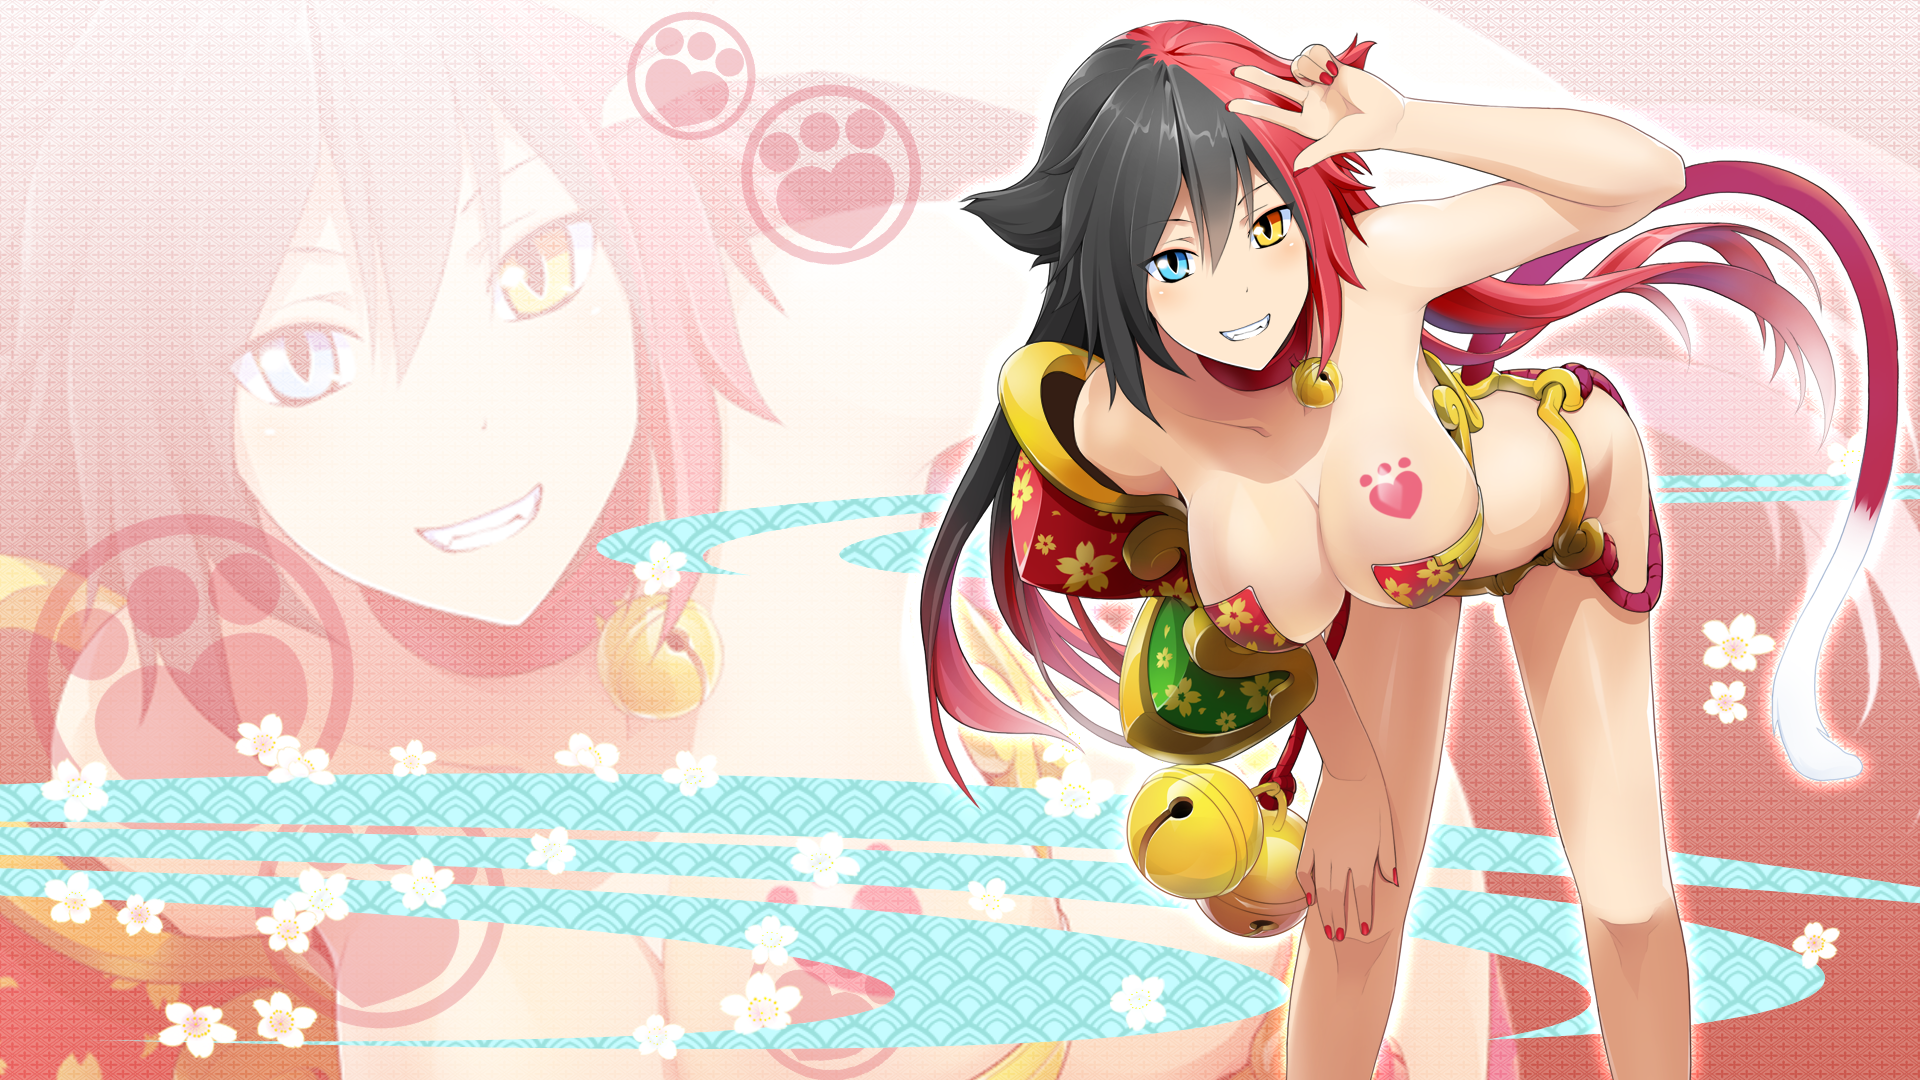 Anime 1920x1080 Onigirl heterochromia tail Ibaraki Douji anime girls anime boobs big boobs hand gesture red nails painted nails looking at viewer smiling